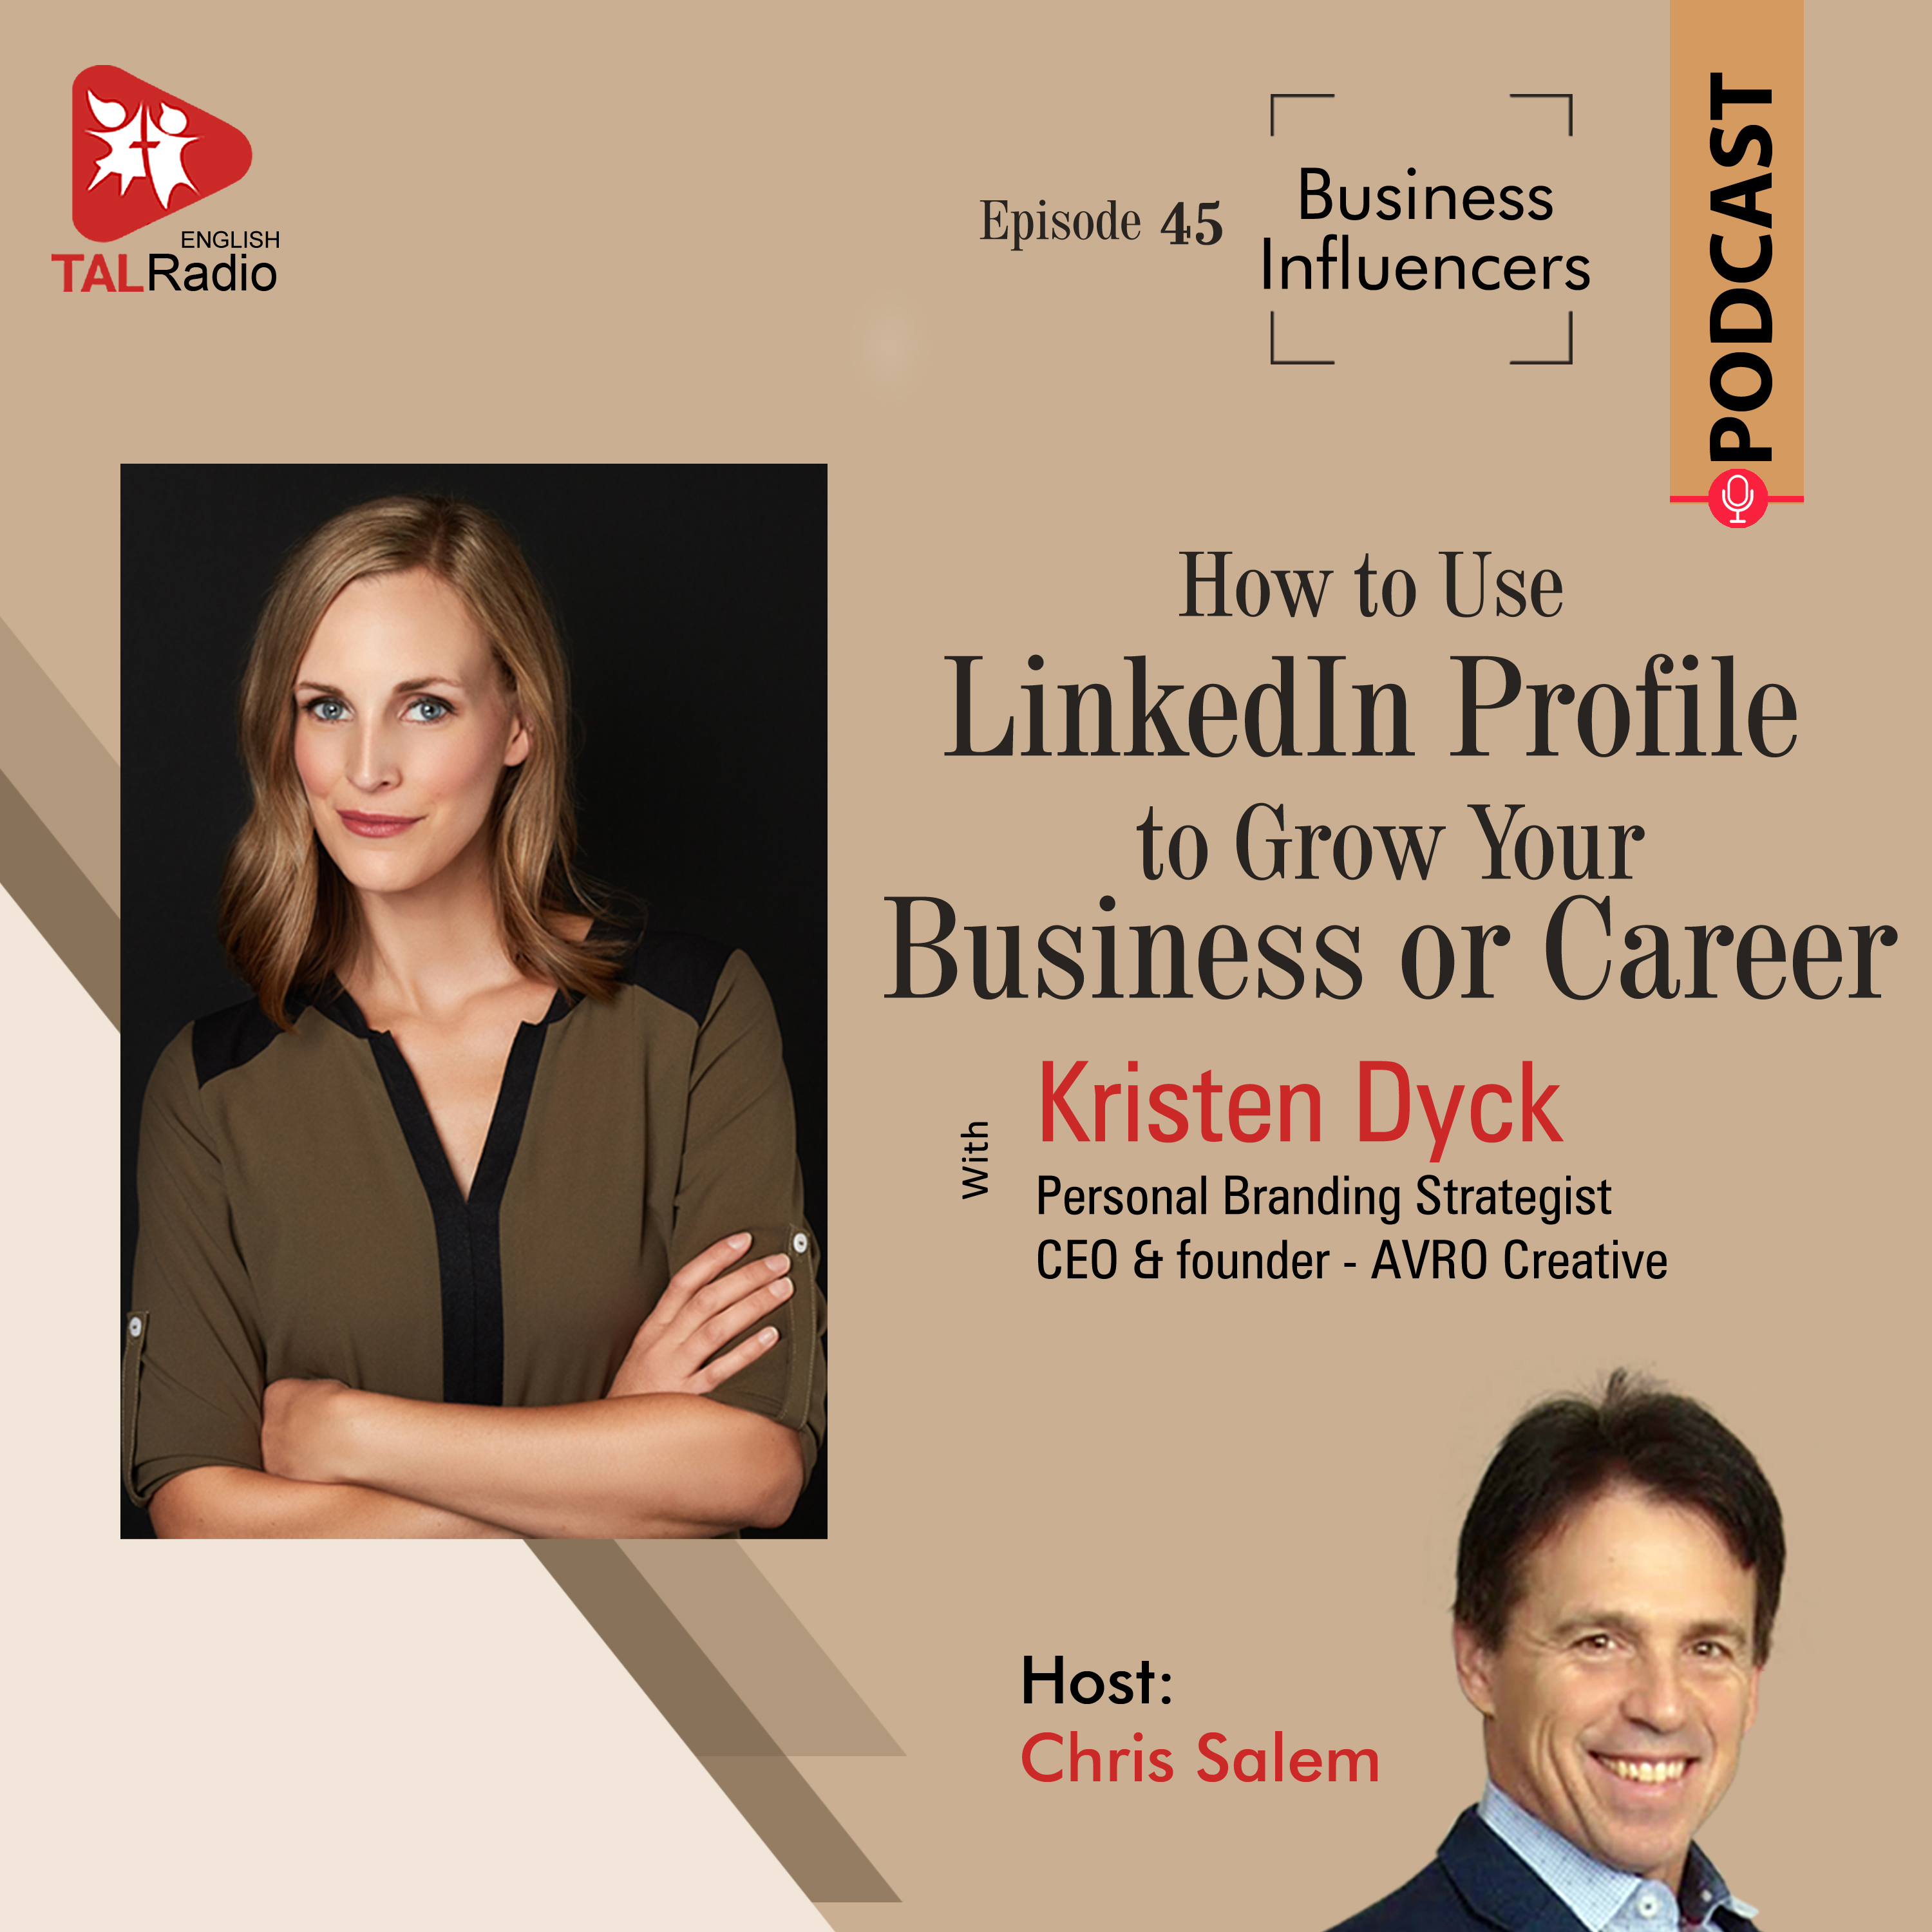 How to Use LinkedIn Profile to Grow Your Business or Career | Business influencers